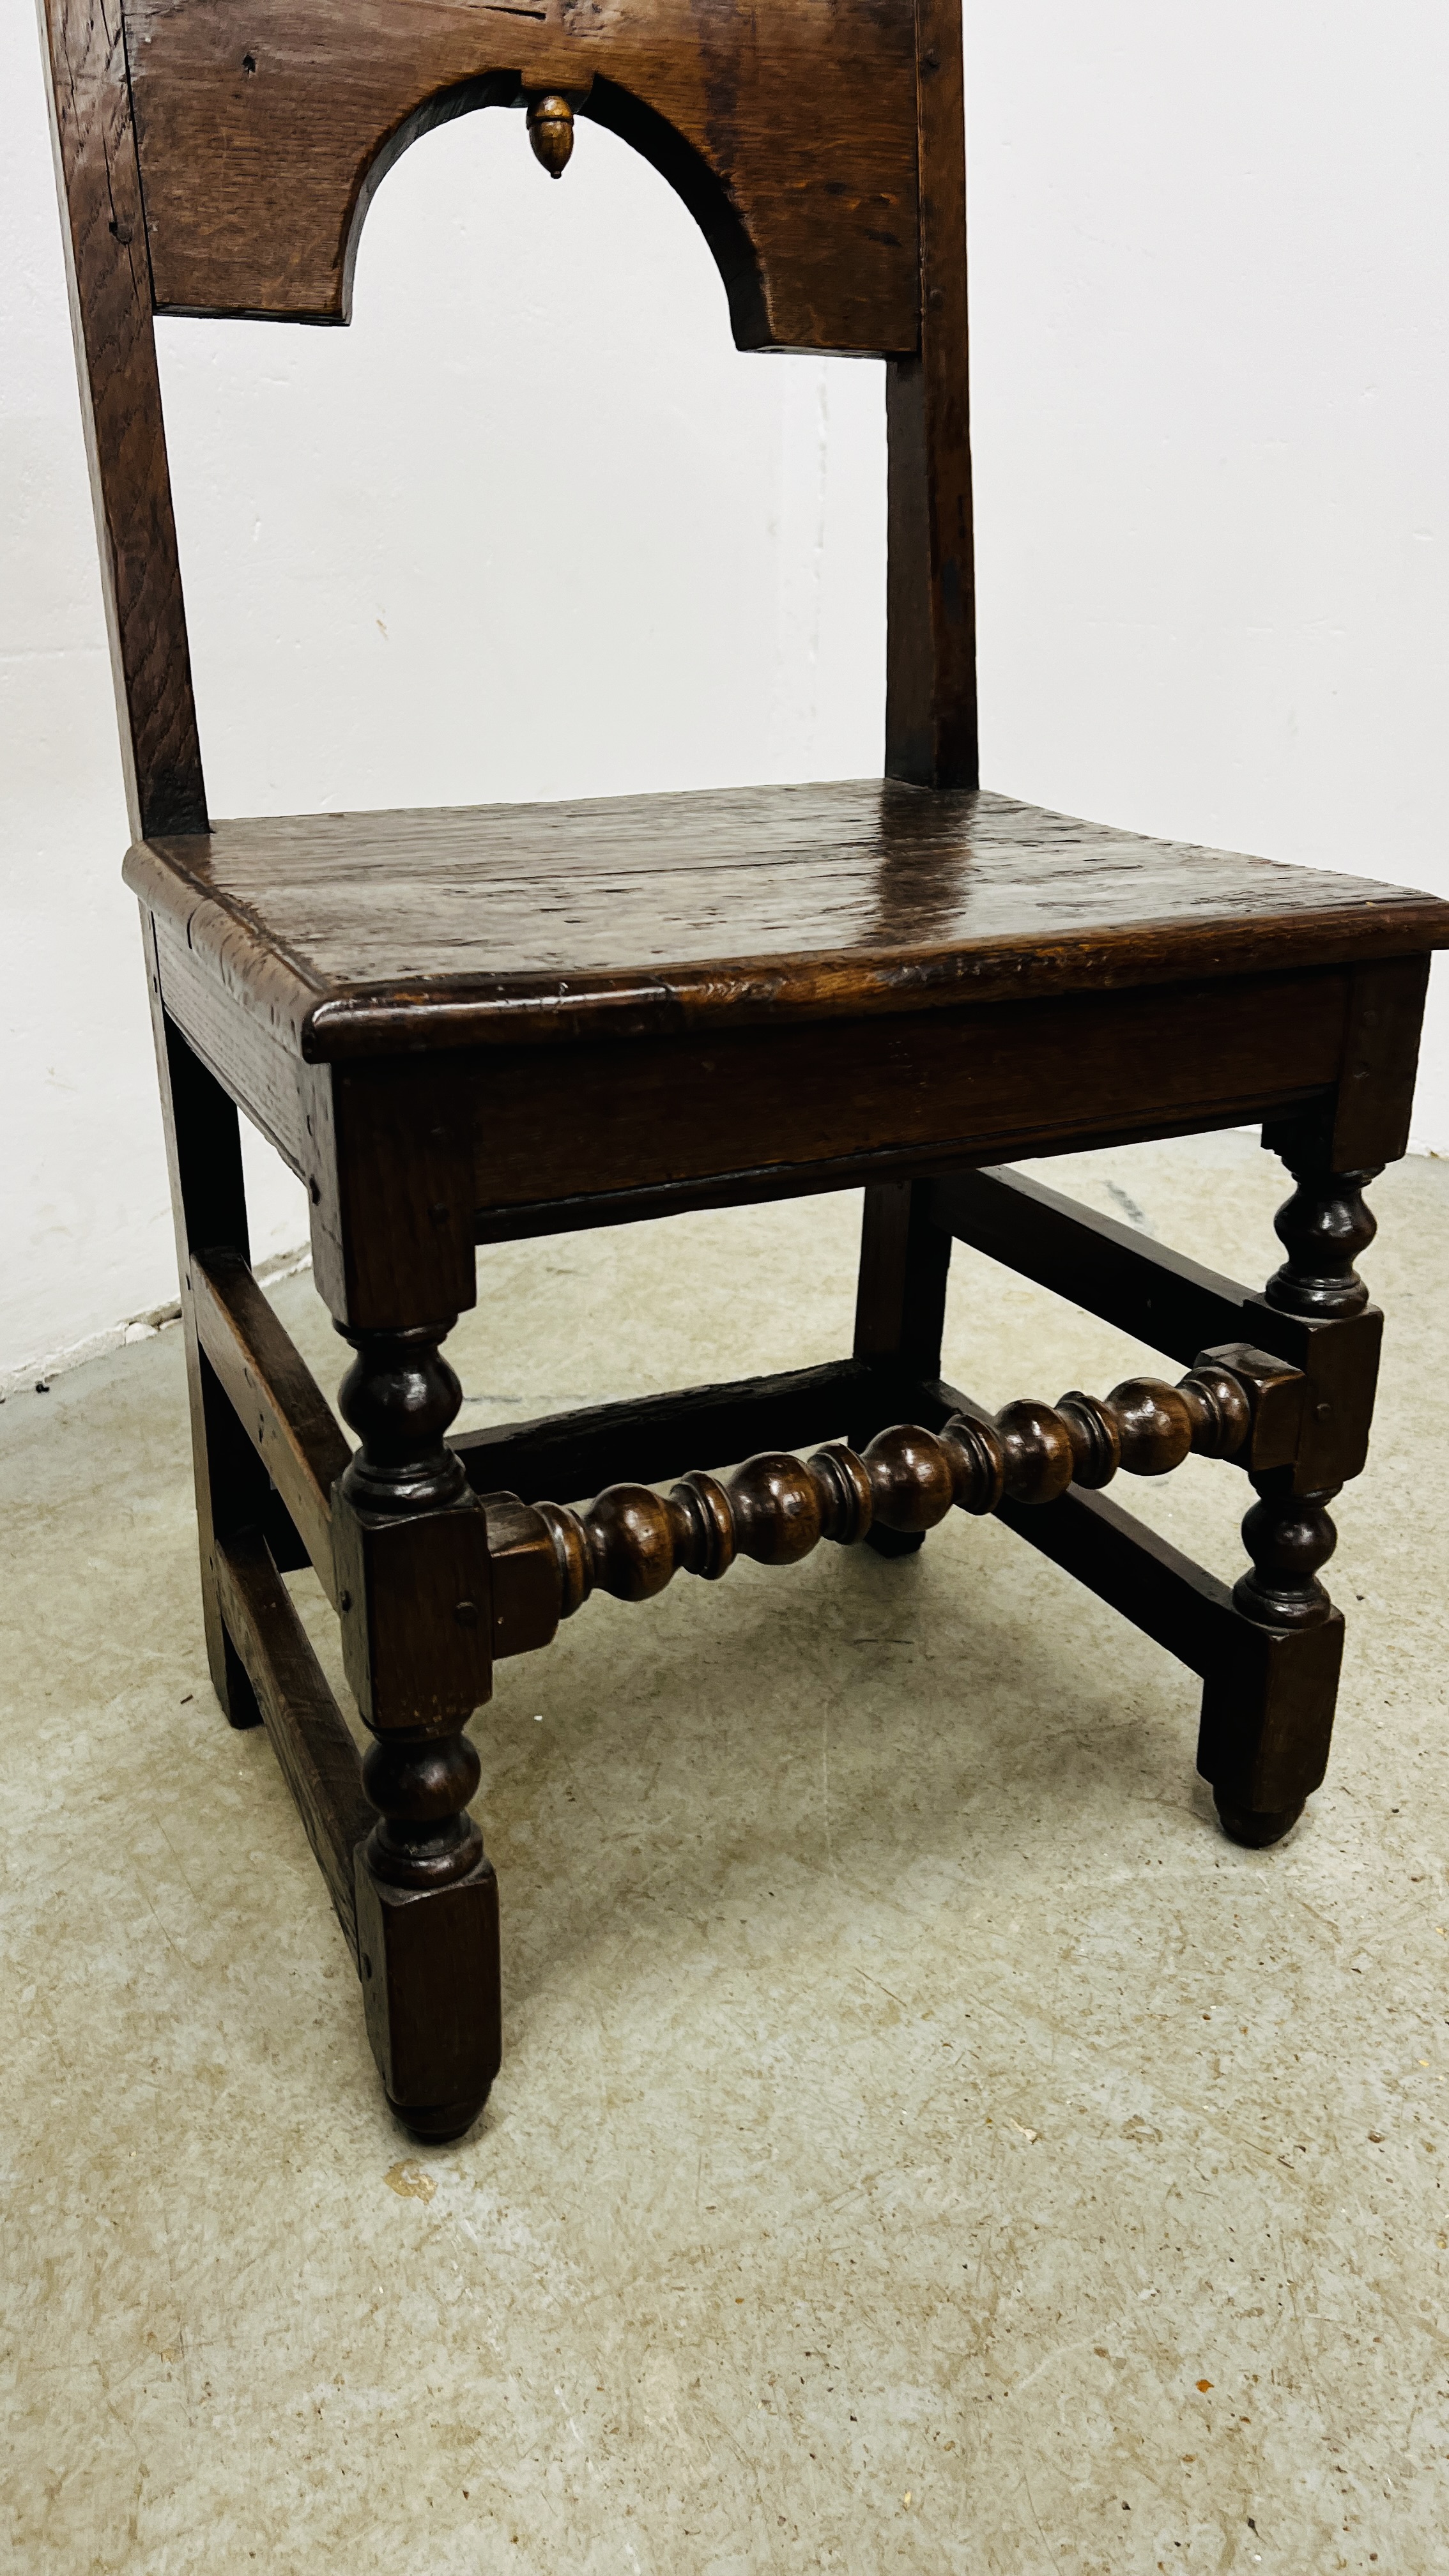 A PAIR OF 17TH CENTURY JOINED OAK CHAIRS, POSSIBLY NORTH COUNTRY. - Image 11 of 20